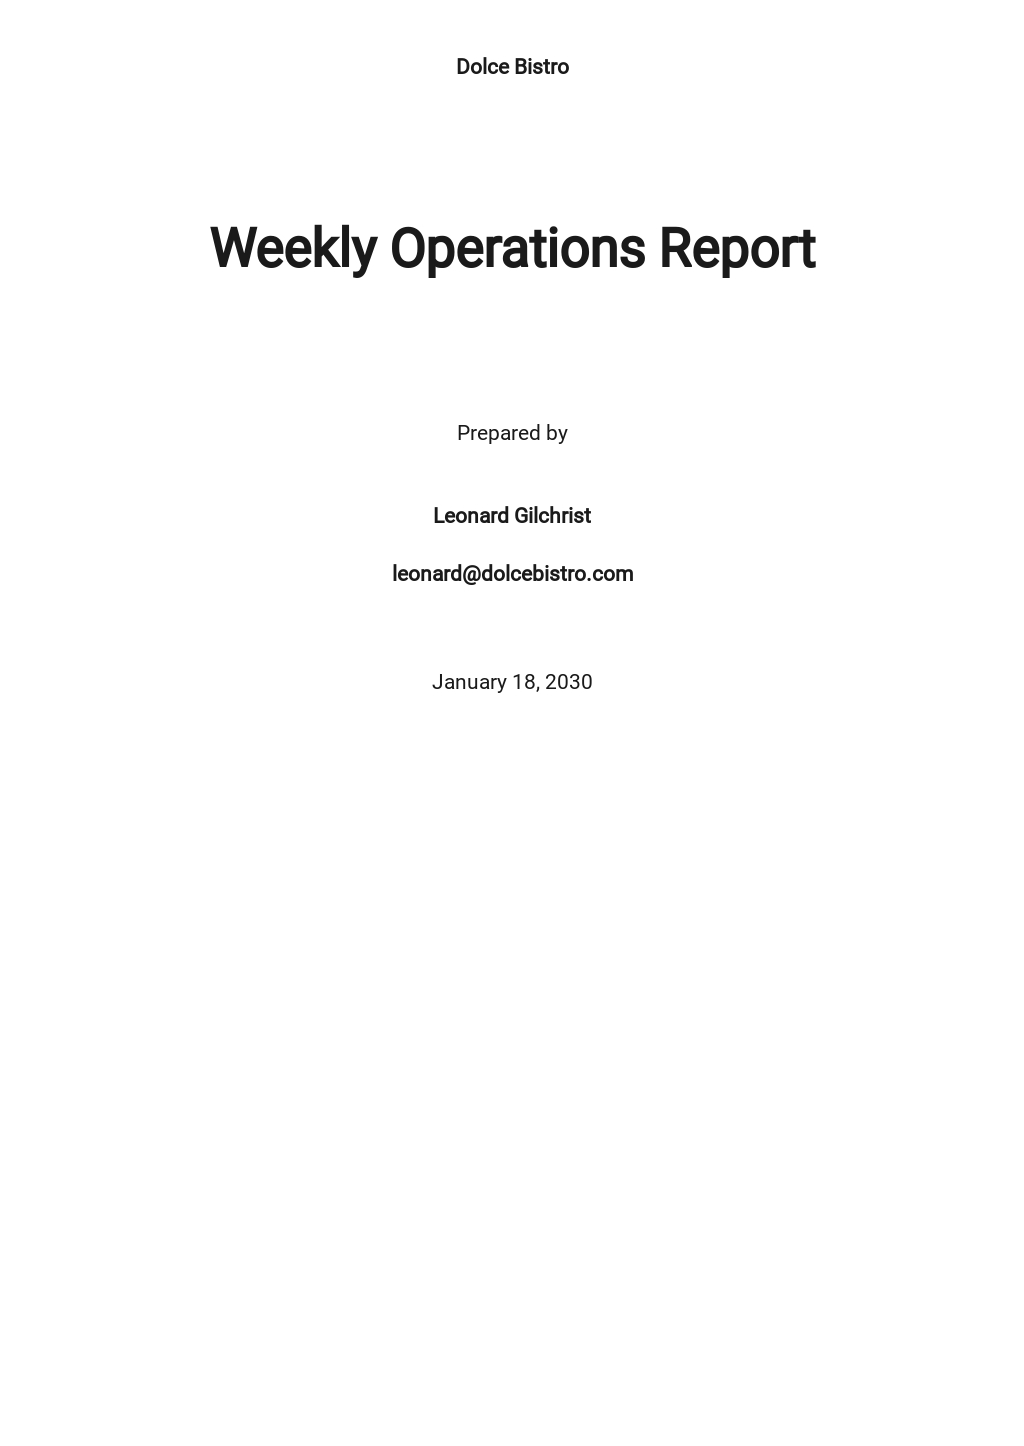 Weekly Operations Report Template in Google Docs Word Template net